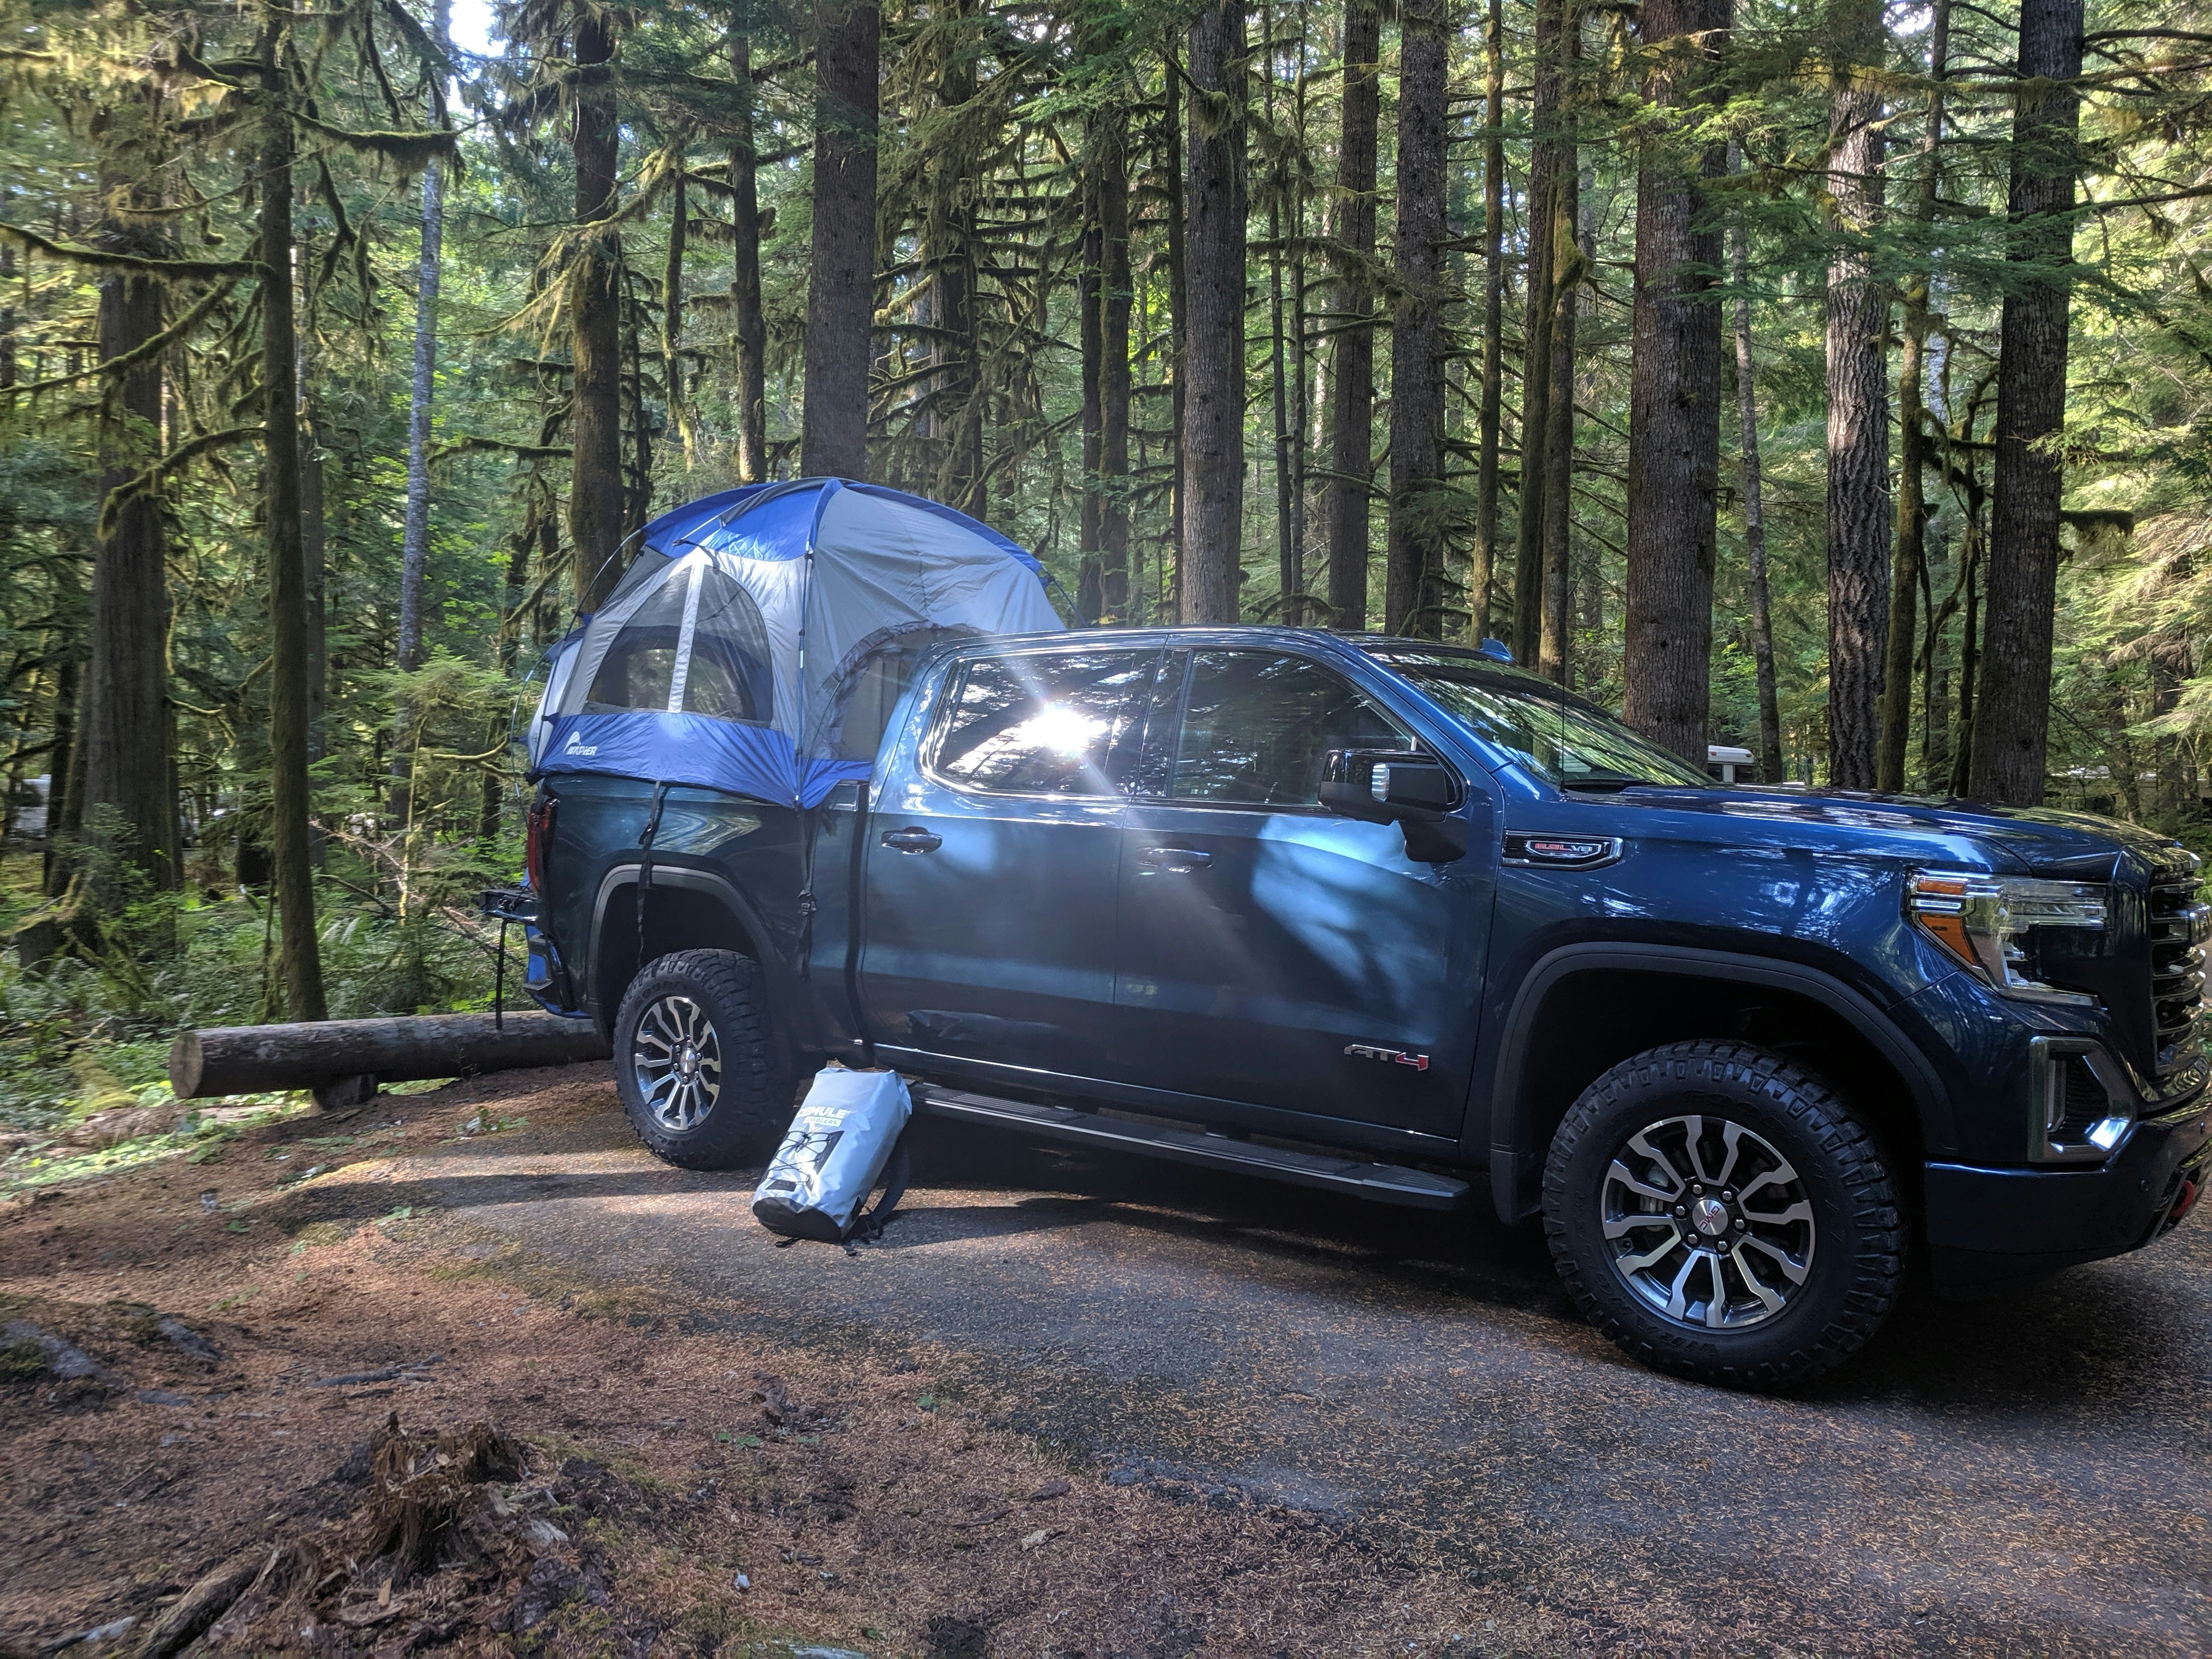 A dark blue 2019 GMC Sierra truck with a brighter blue and grey truck tent mounted in the bed sits in a green forest in Washington State